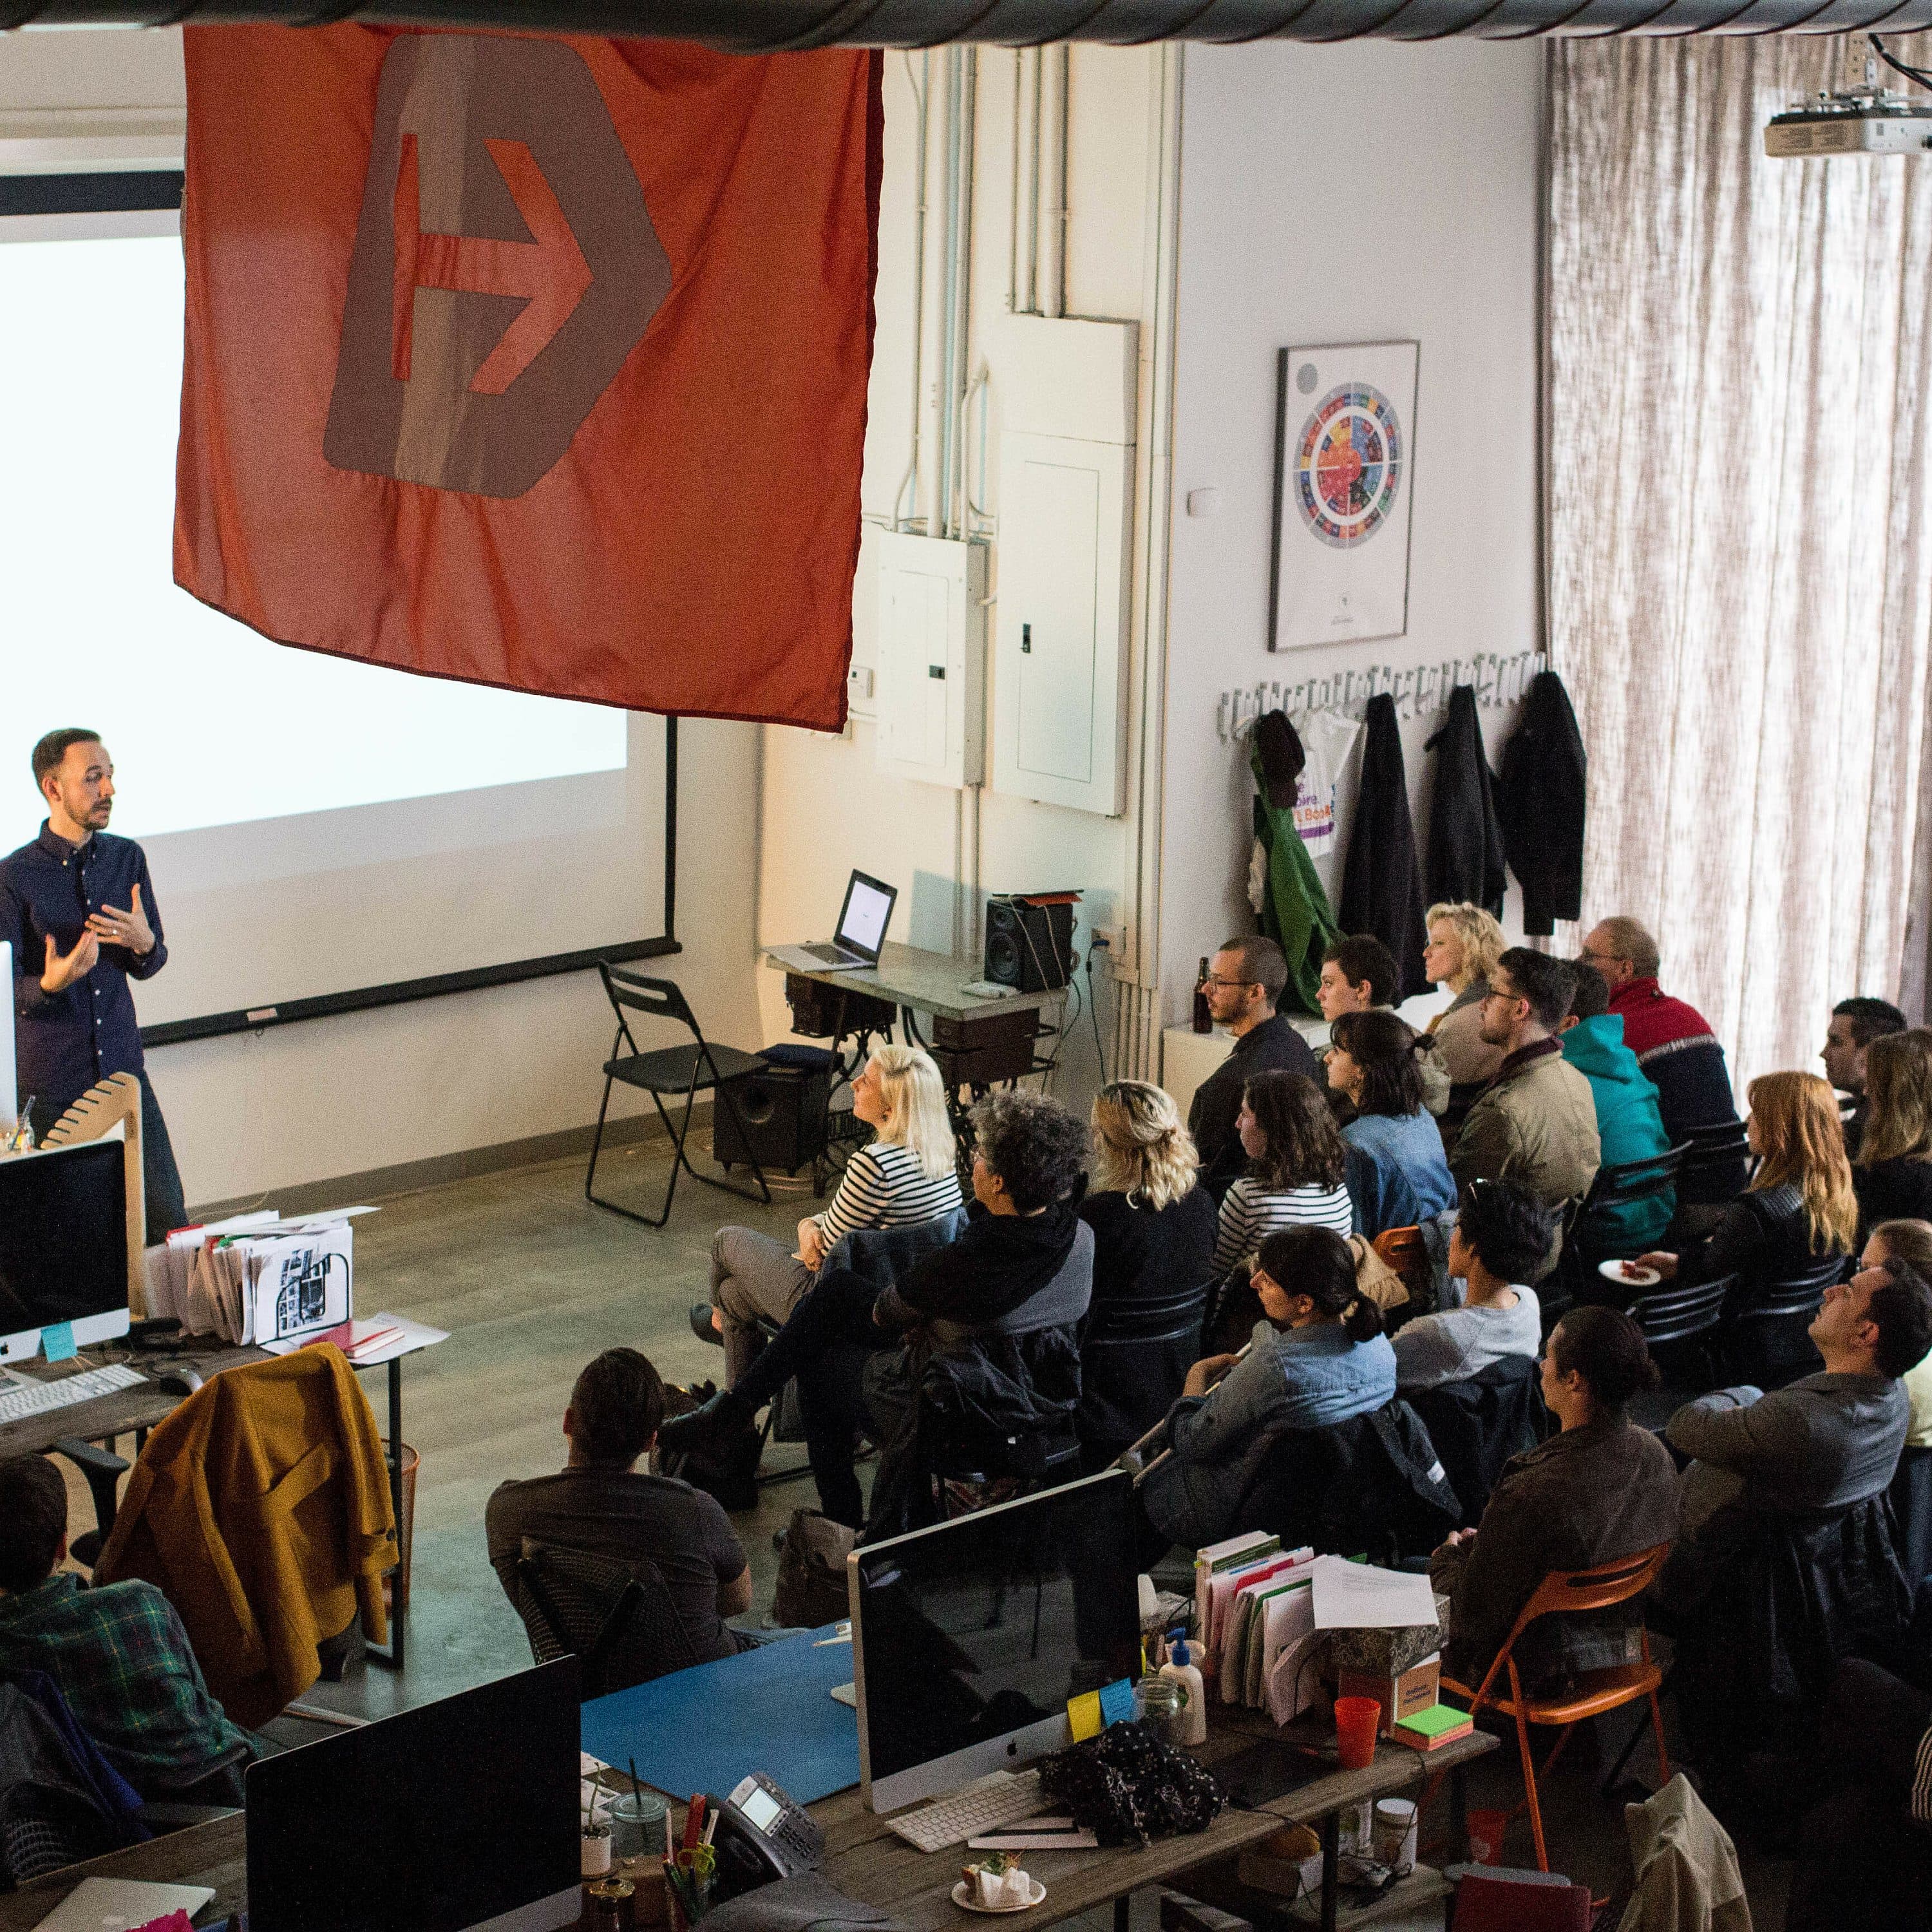 A speaker is giving a presentation to a seated audience in a modern office space. A large red flag with a logo hangs overhead, and several computer monitors and office equipment are visible in the foreground. The audience is engaged and attentive.